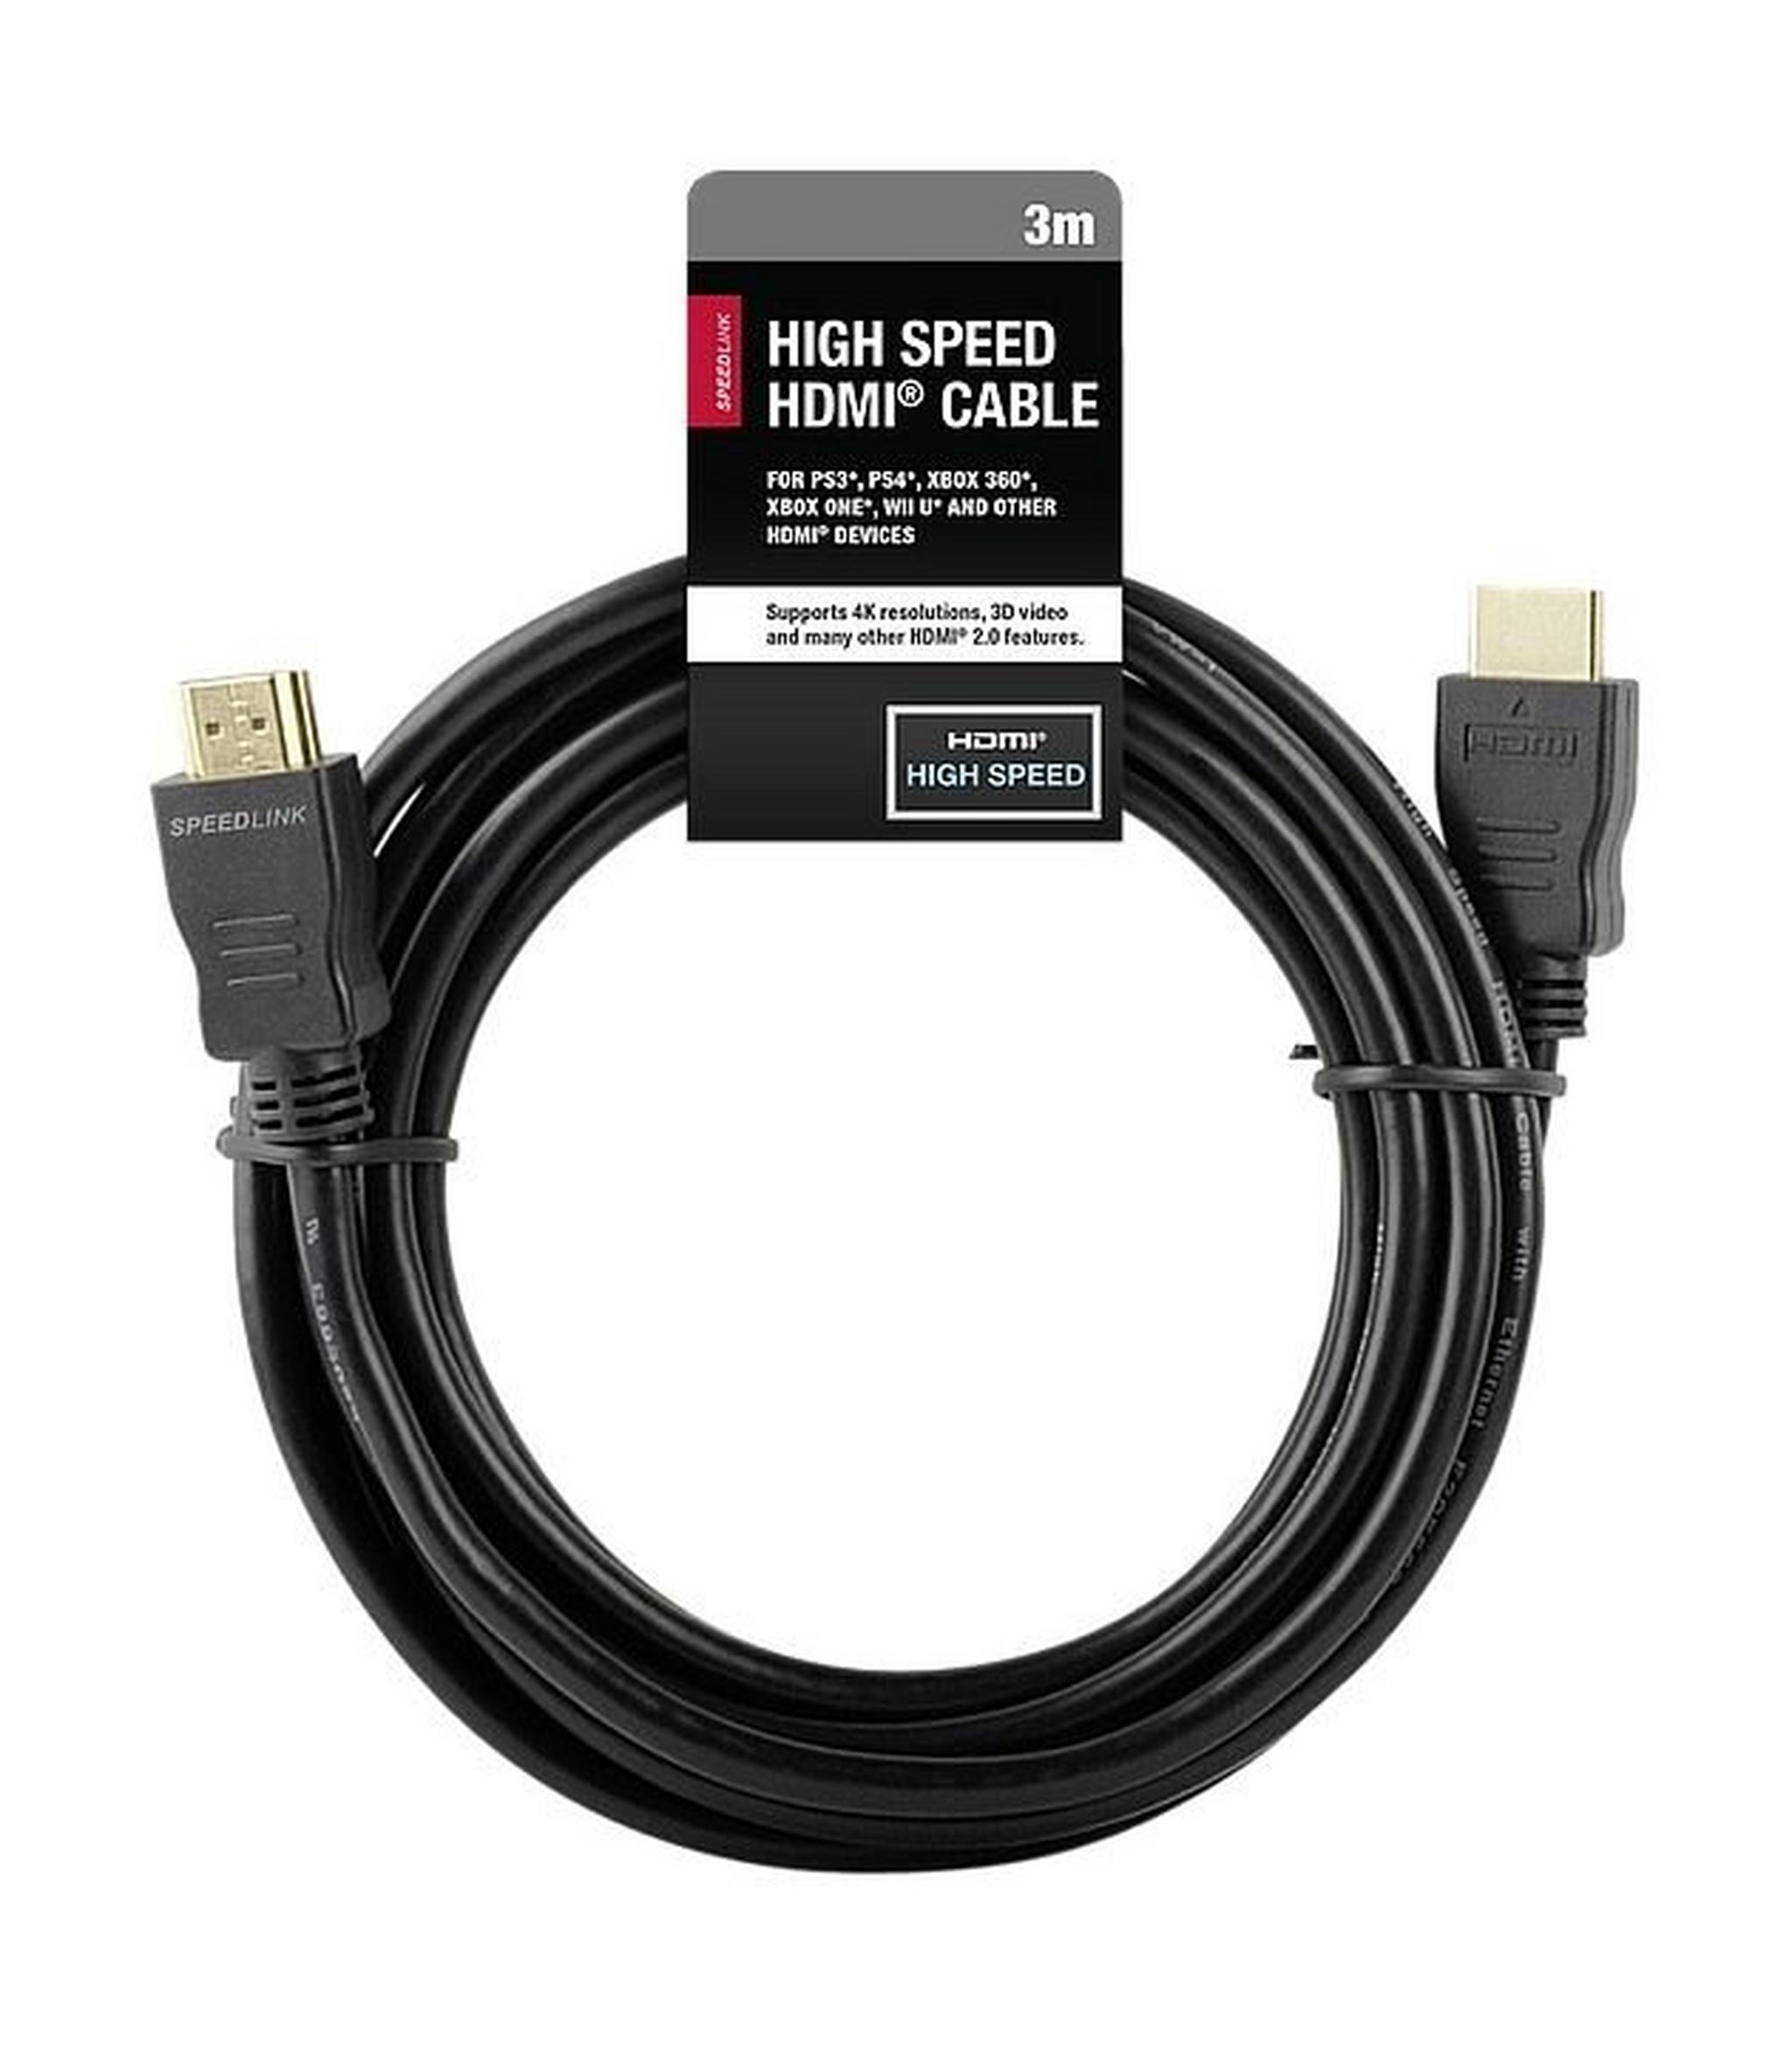 Speedlink 3-Meters High Speed HDMI Cable for PlayStation 3 - Black